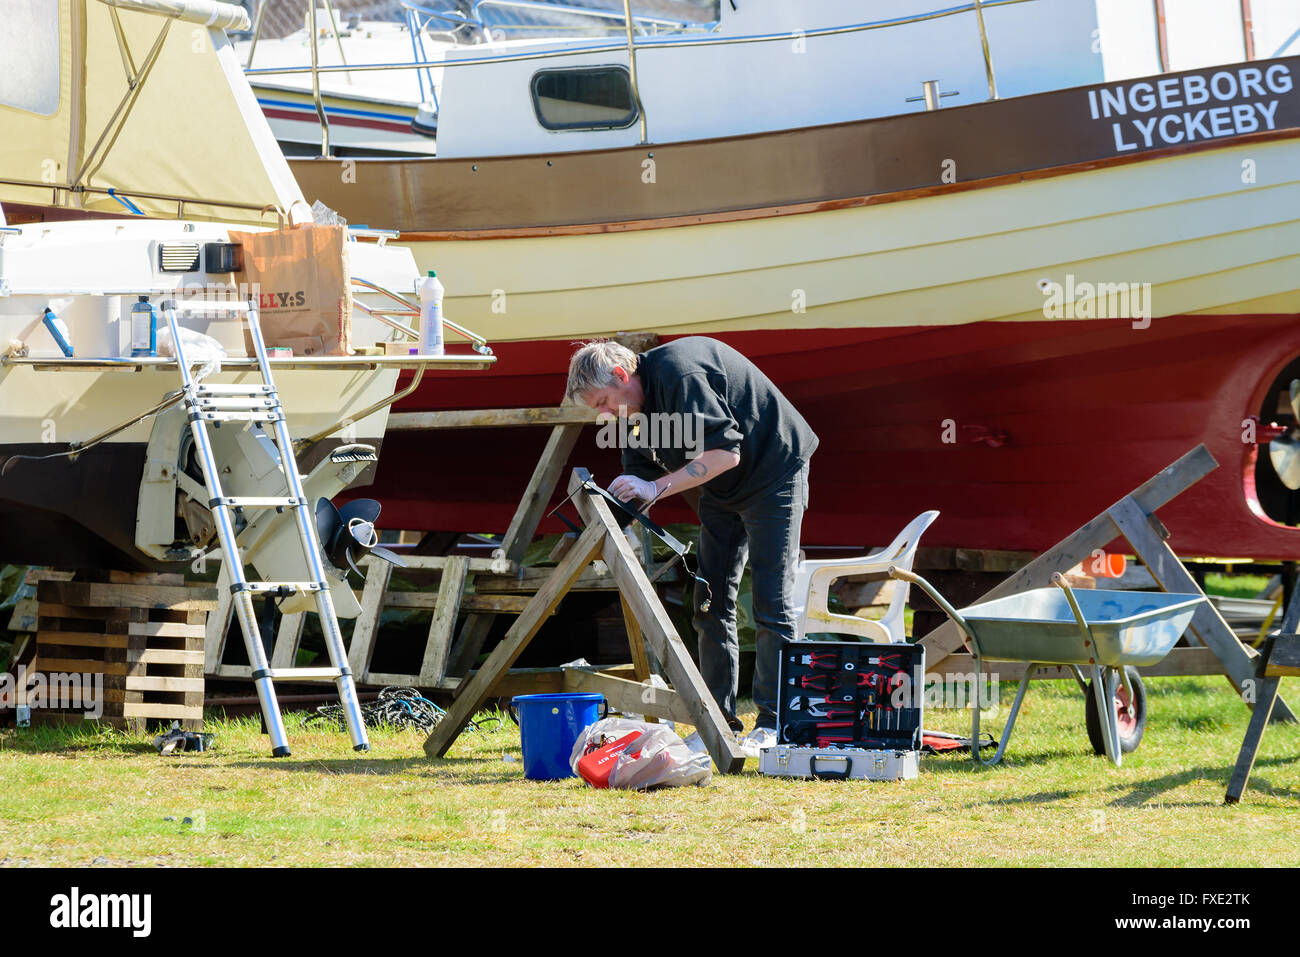 Lyckeby, Sweden - April 7, 2016: Adult male cleaning or repairing a boat detail on a boat yard. Open toolbox beside him. He wear Stock Photo